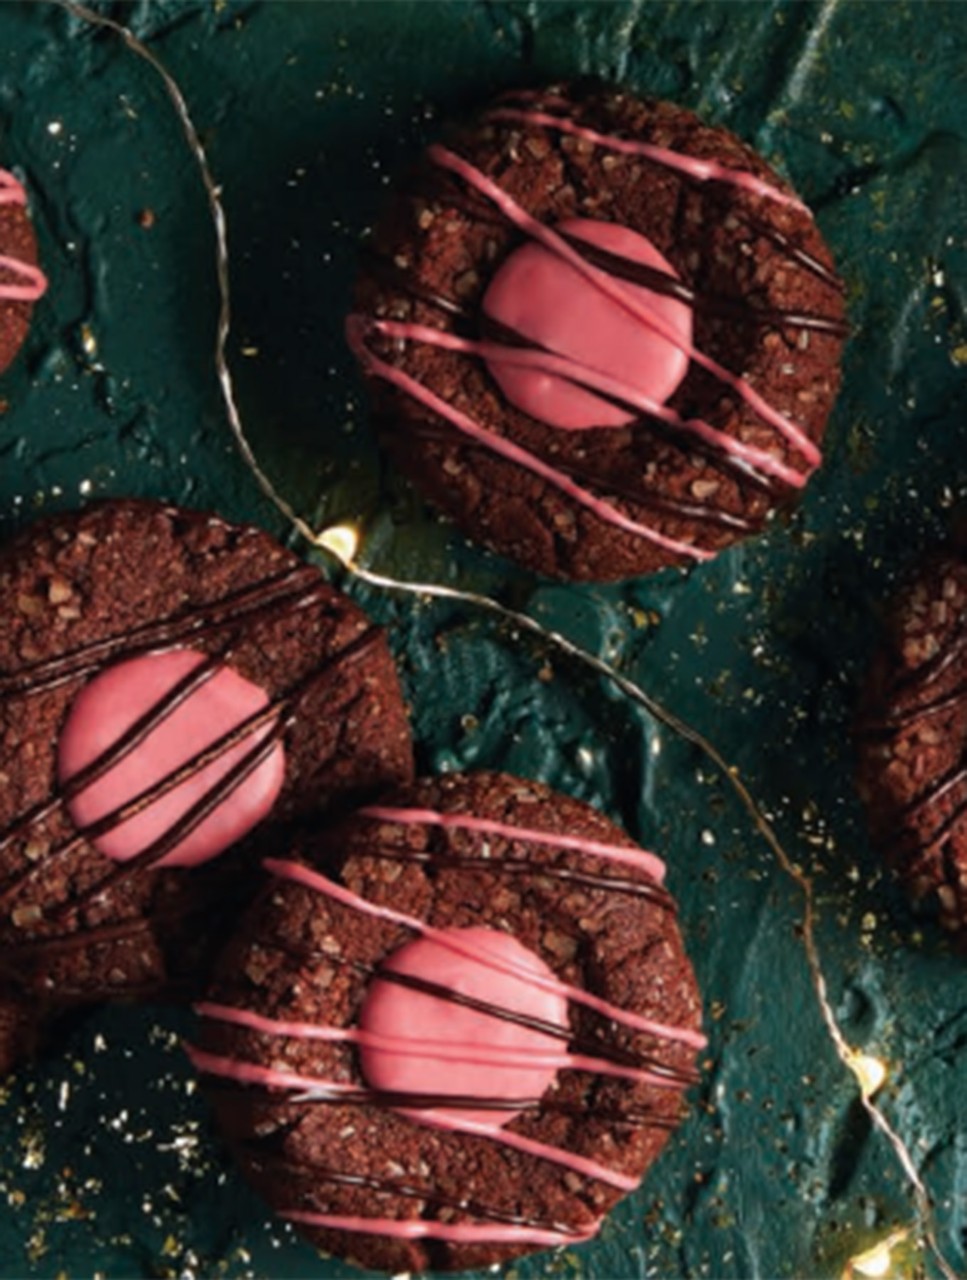 Sparkling Triple Chocolate Thumbprints with Ruby Centres